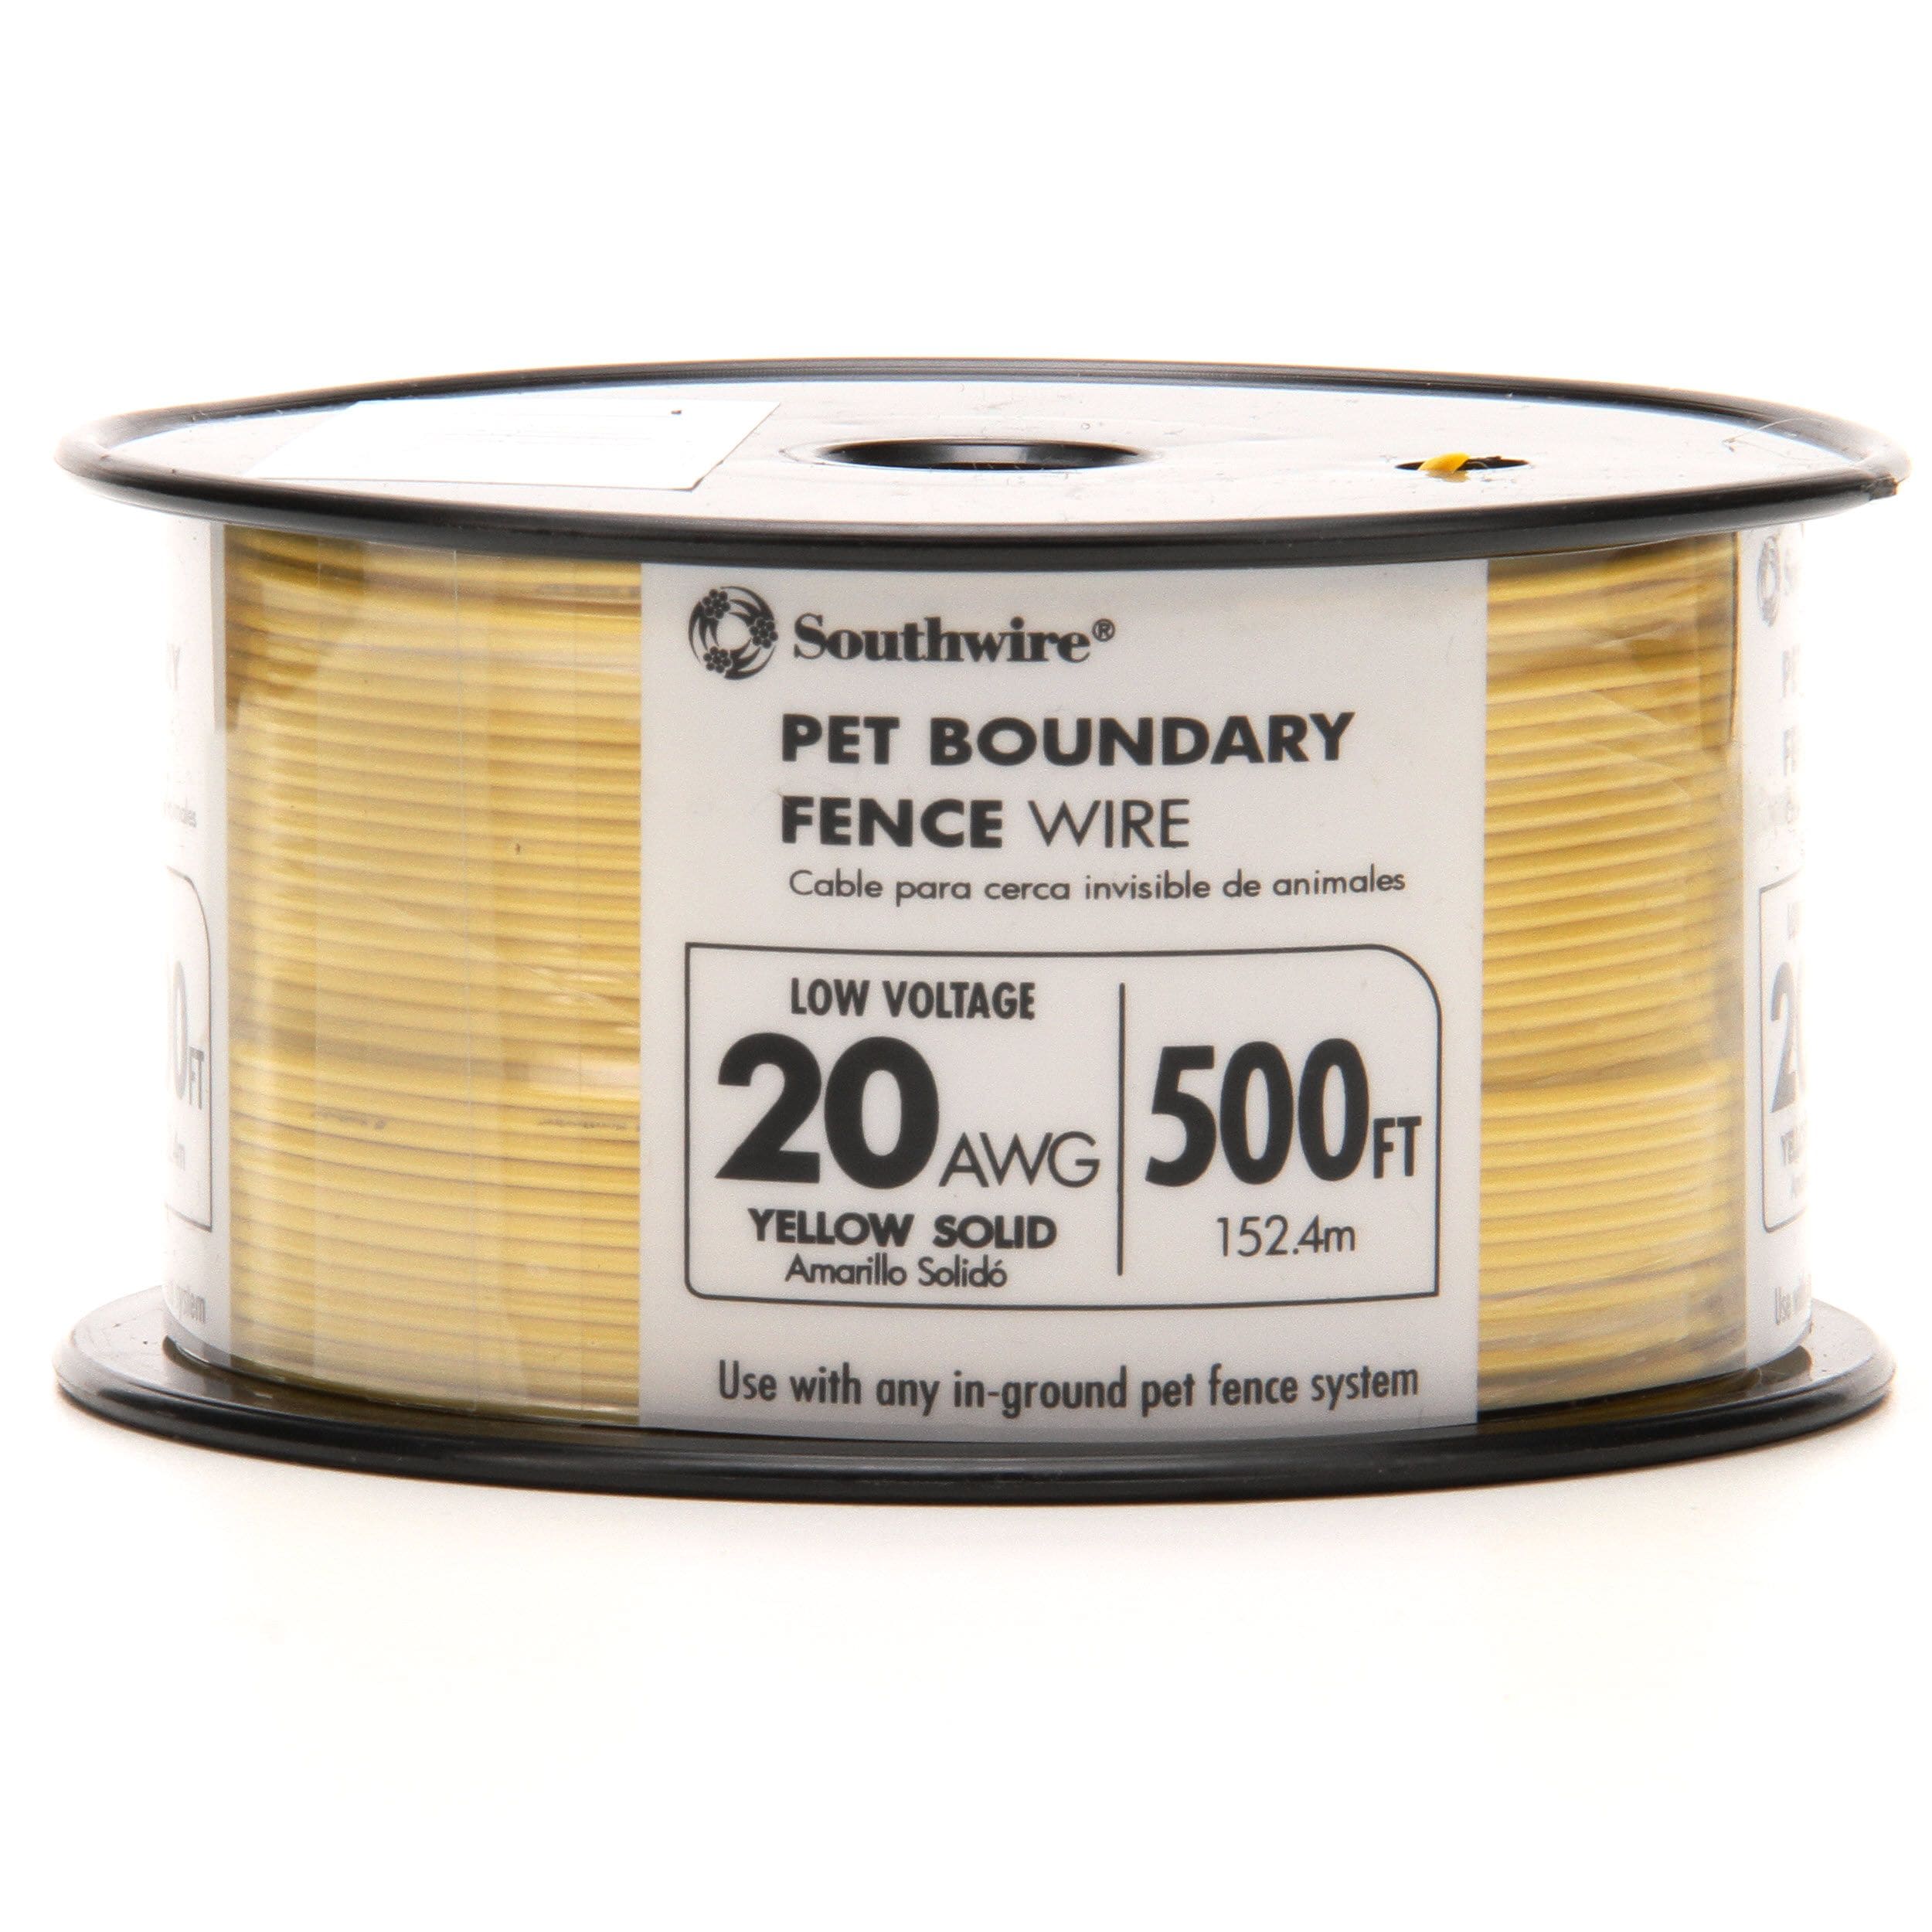 58356401 Southwire Pet Boundary Fence Wire 20 Awg 500 Feet FREE SHIPPING 